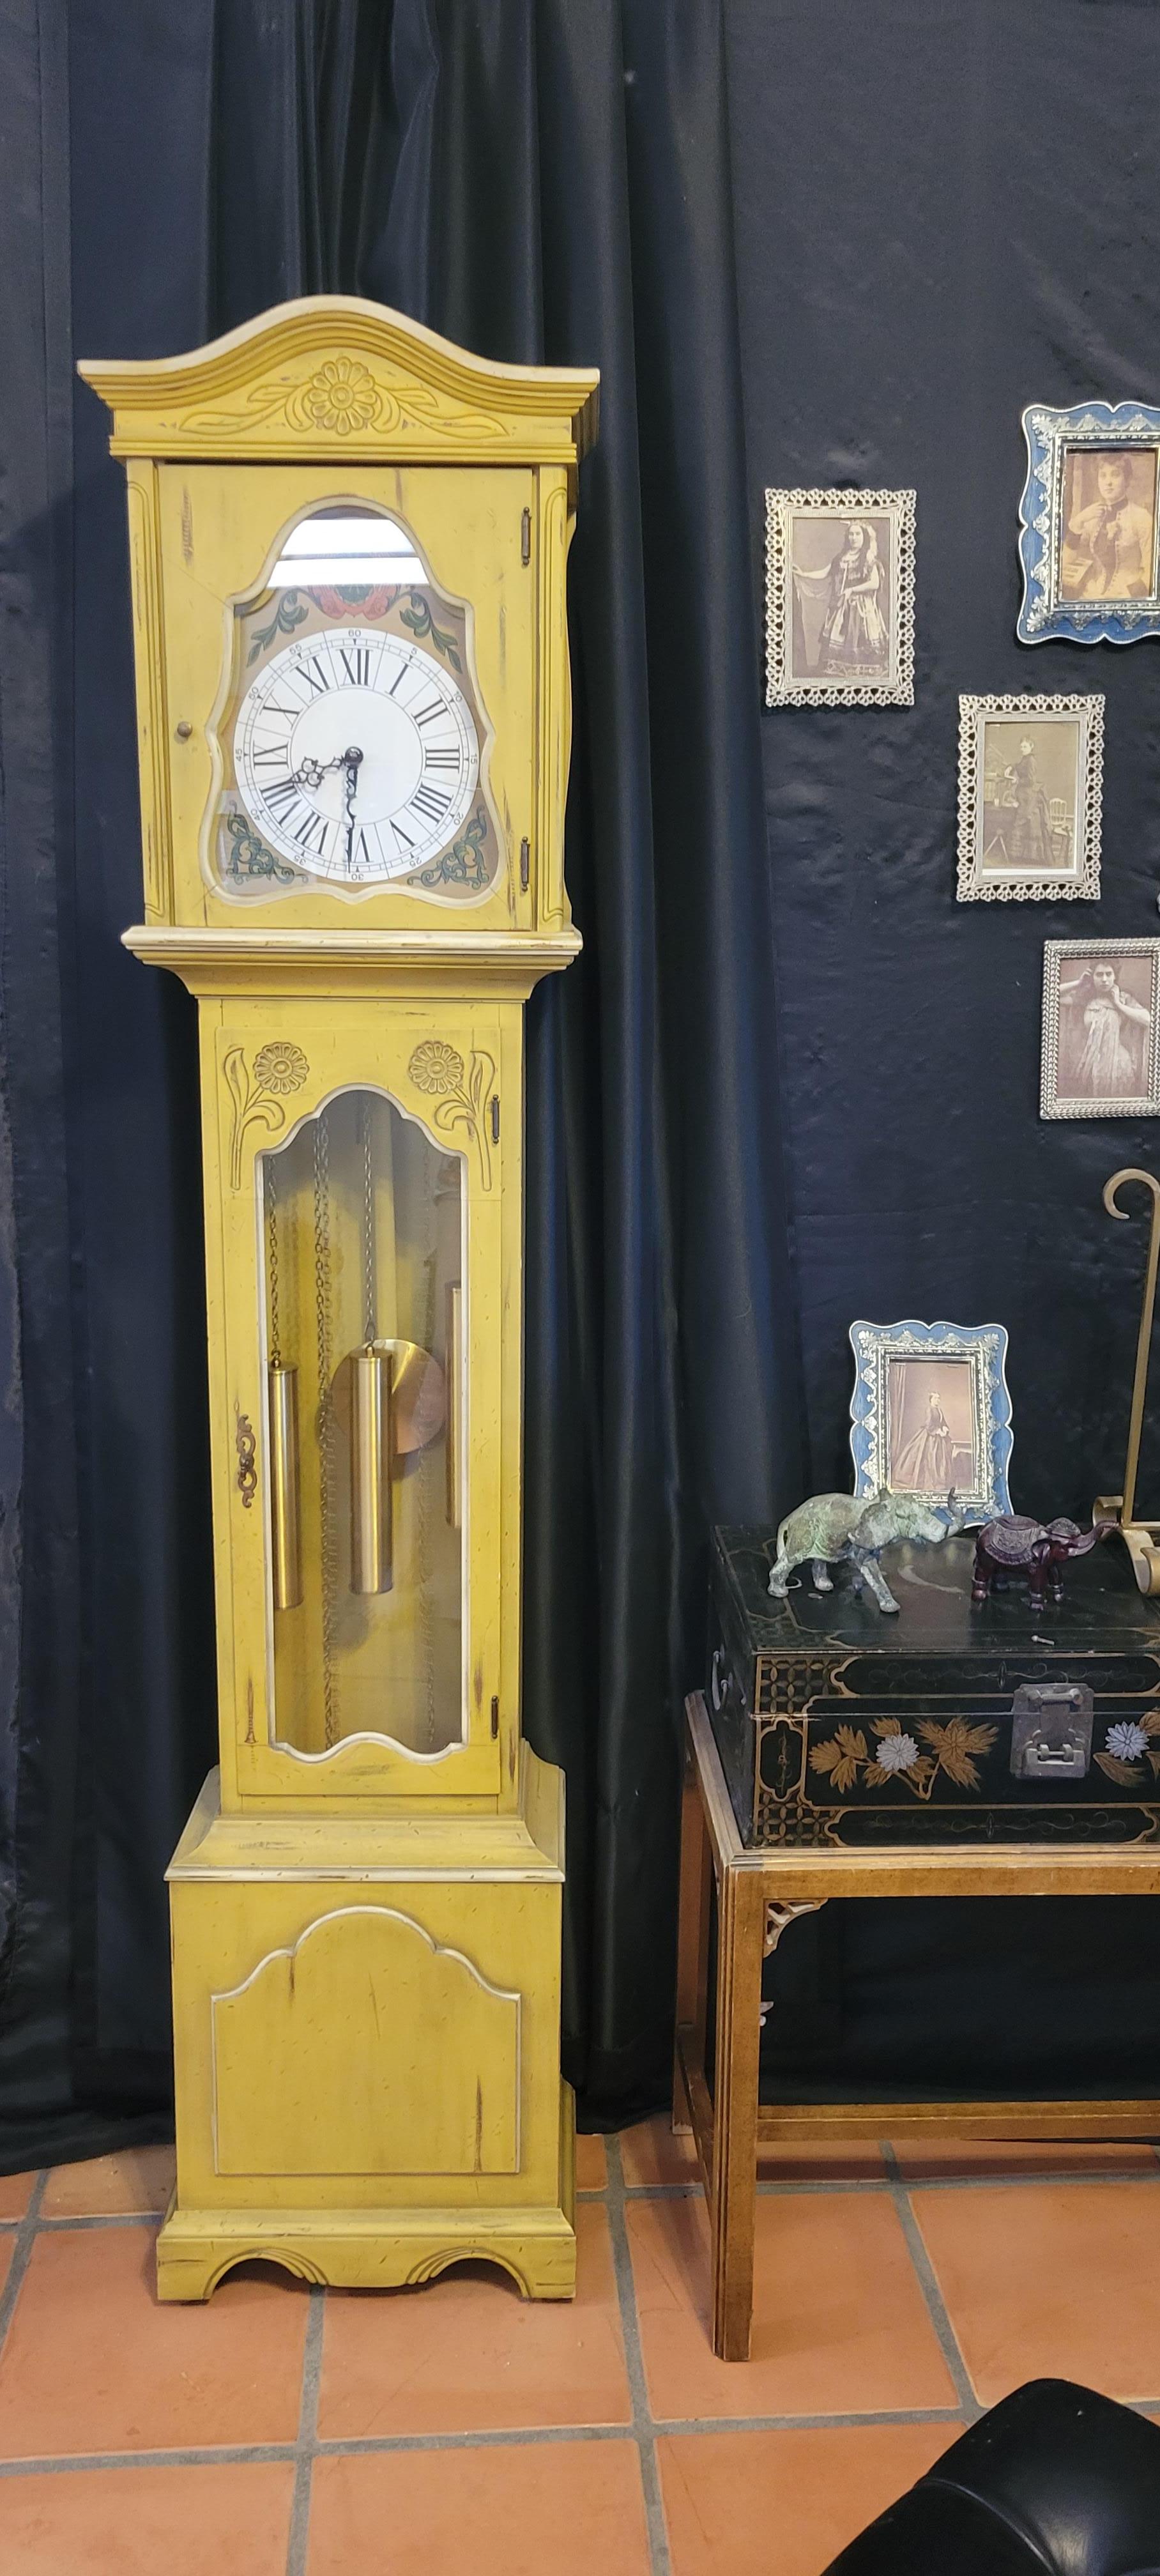 Decorative piece. We were only able to make it work for a few minutes. It will chime with a beautiful Westminster chime melody if the hands are moved manually. Possibly, after servicing the clock will start working again, however most likely the